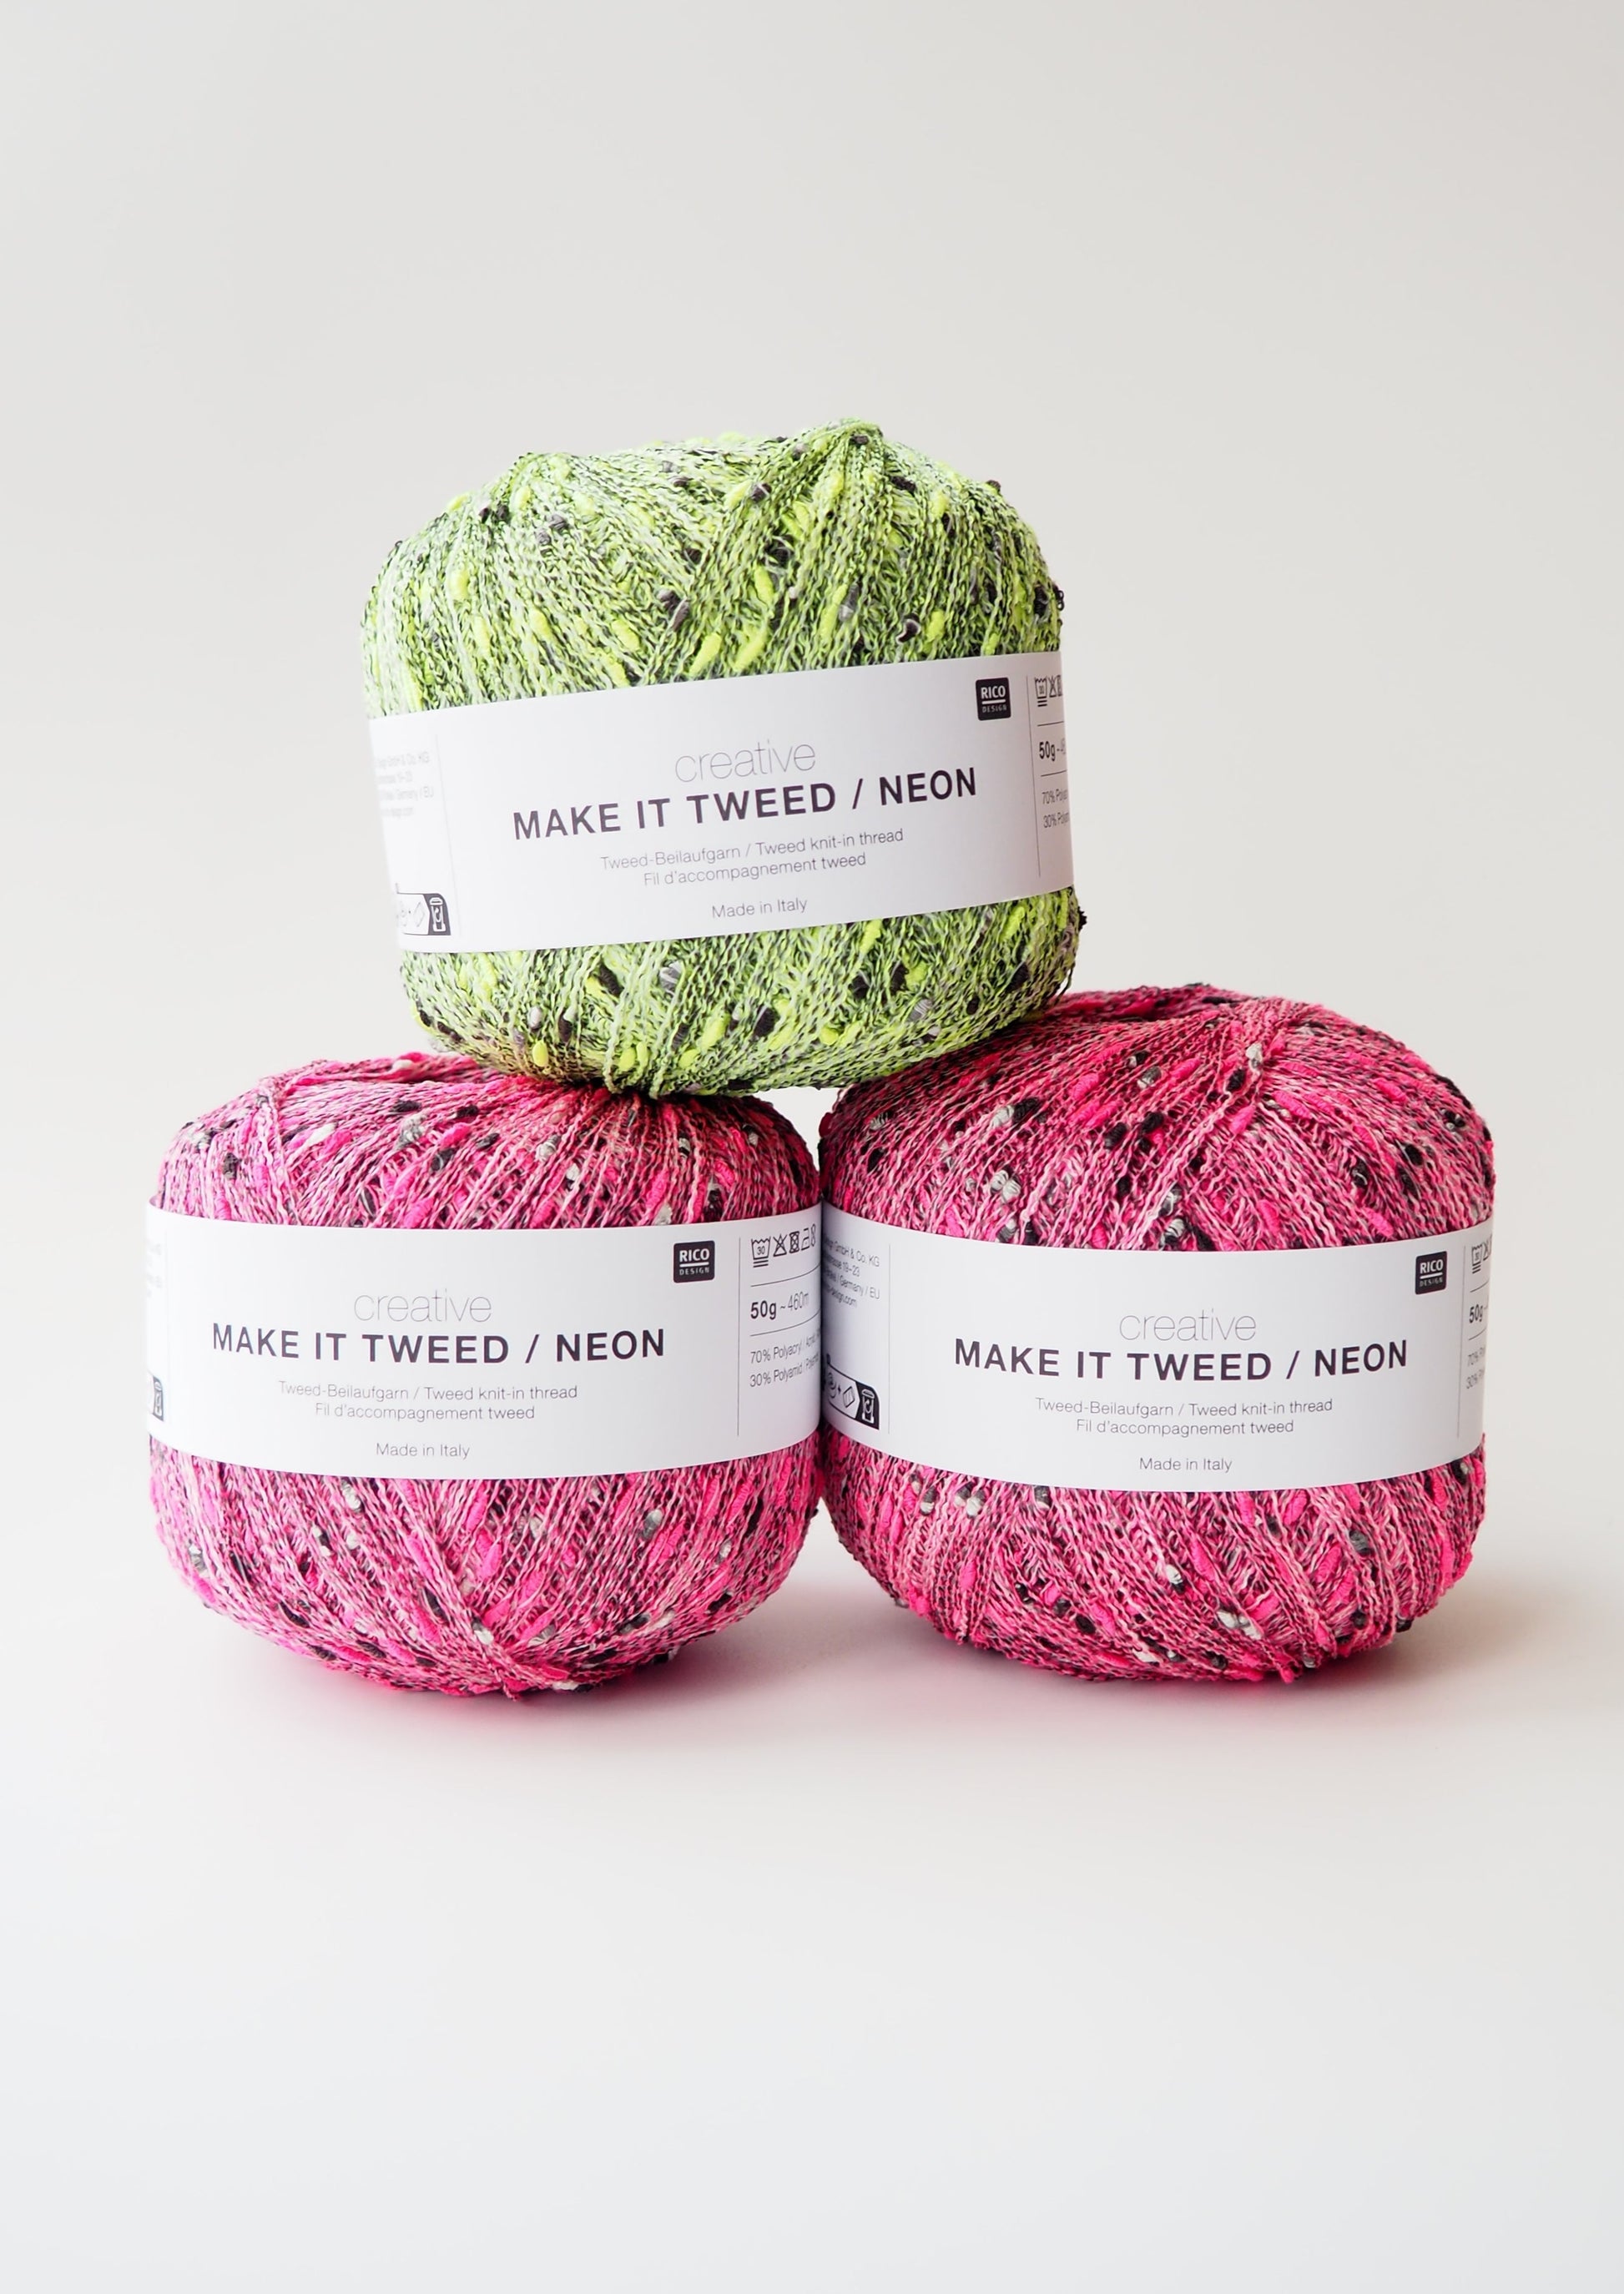 Image showcasing three balls of Rico Creative Make It Tweed yarn (one green and two pink), a versatile blend that adds tweed neps to any project. The yarn features a range of neon colours including green and pink, providing texture and depth to knitted or crocheted items.